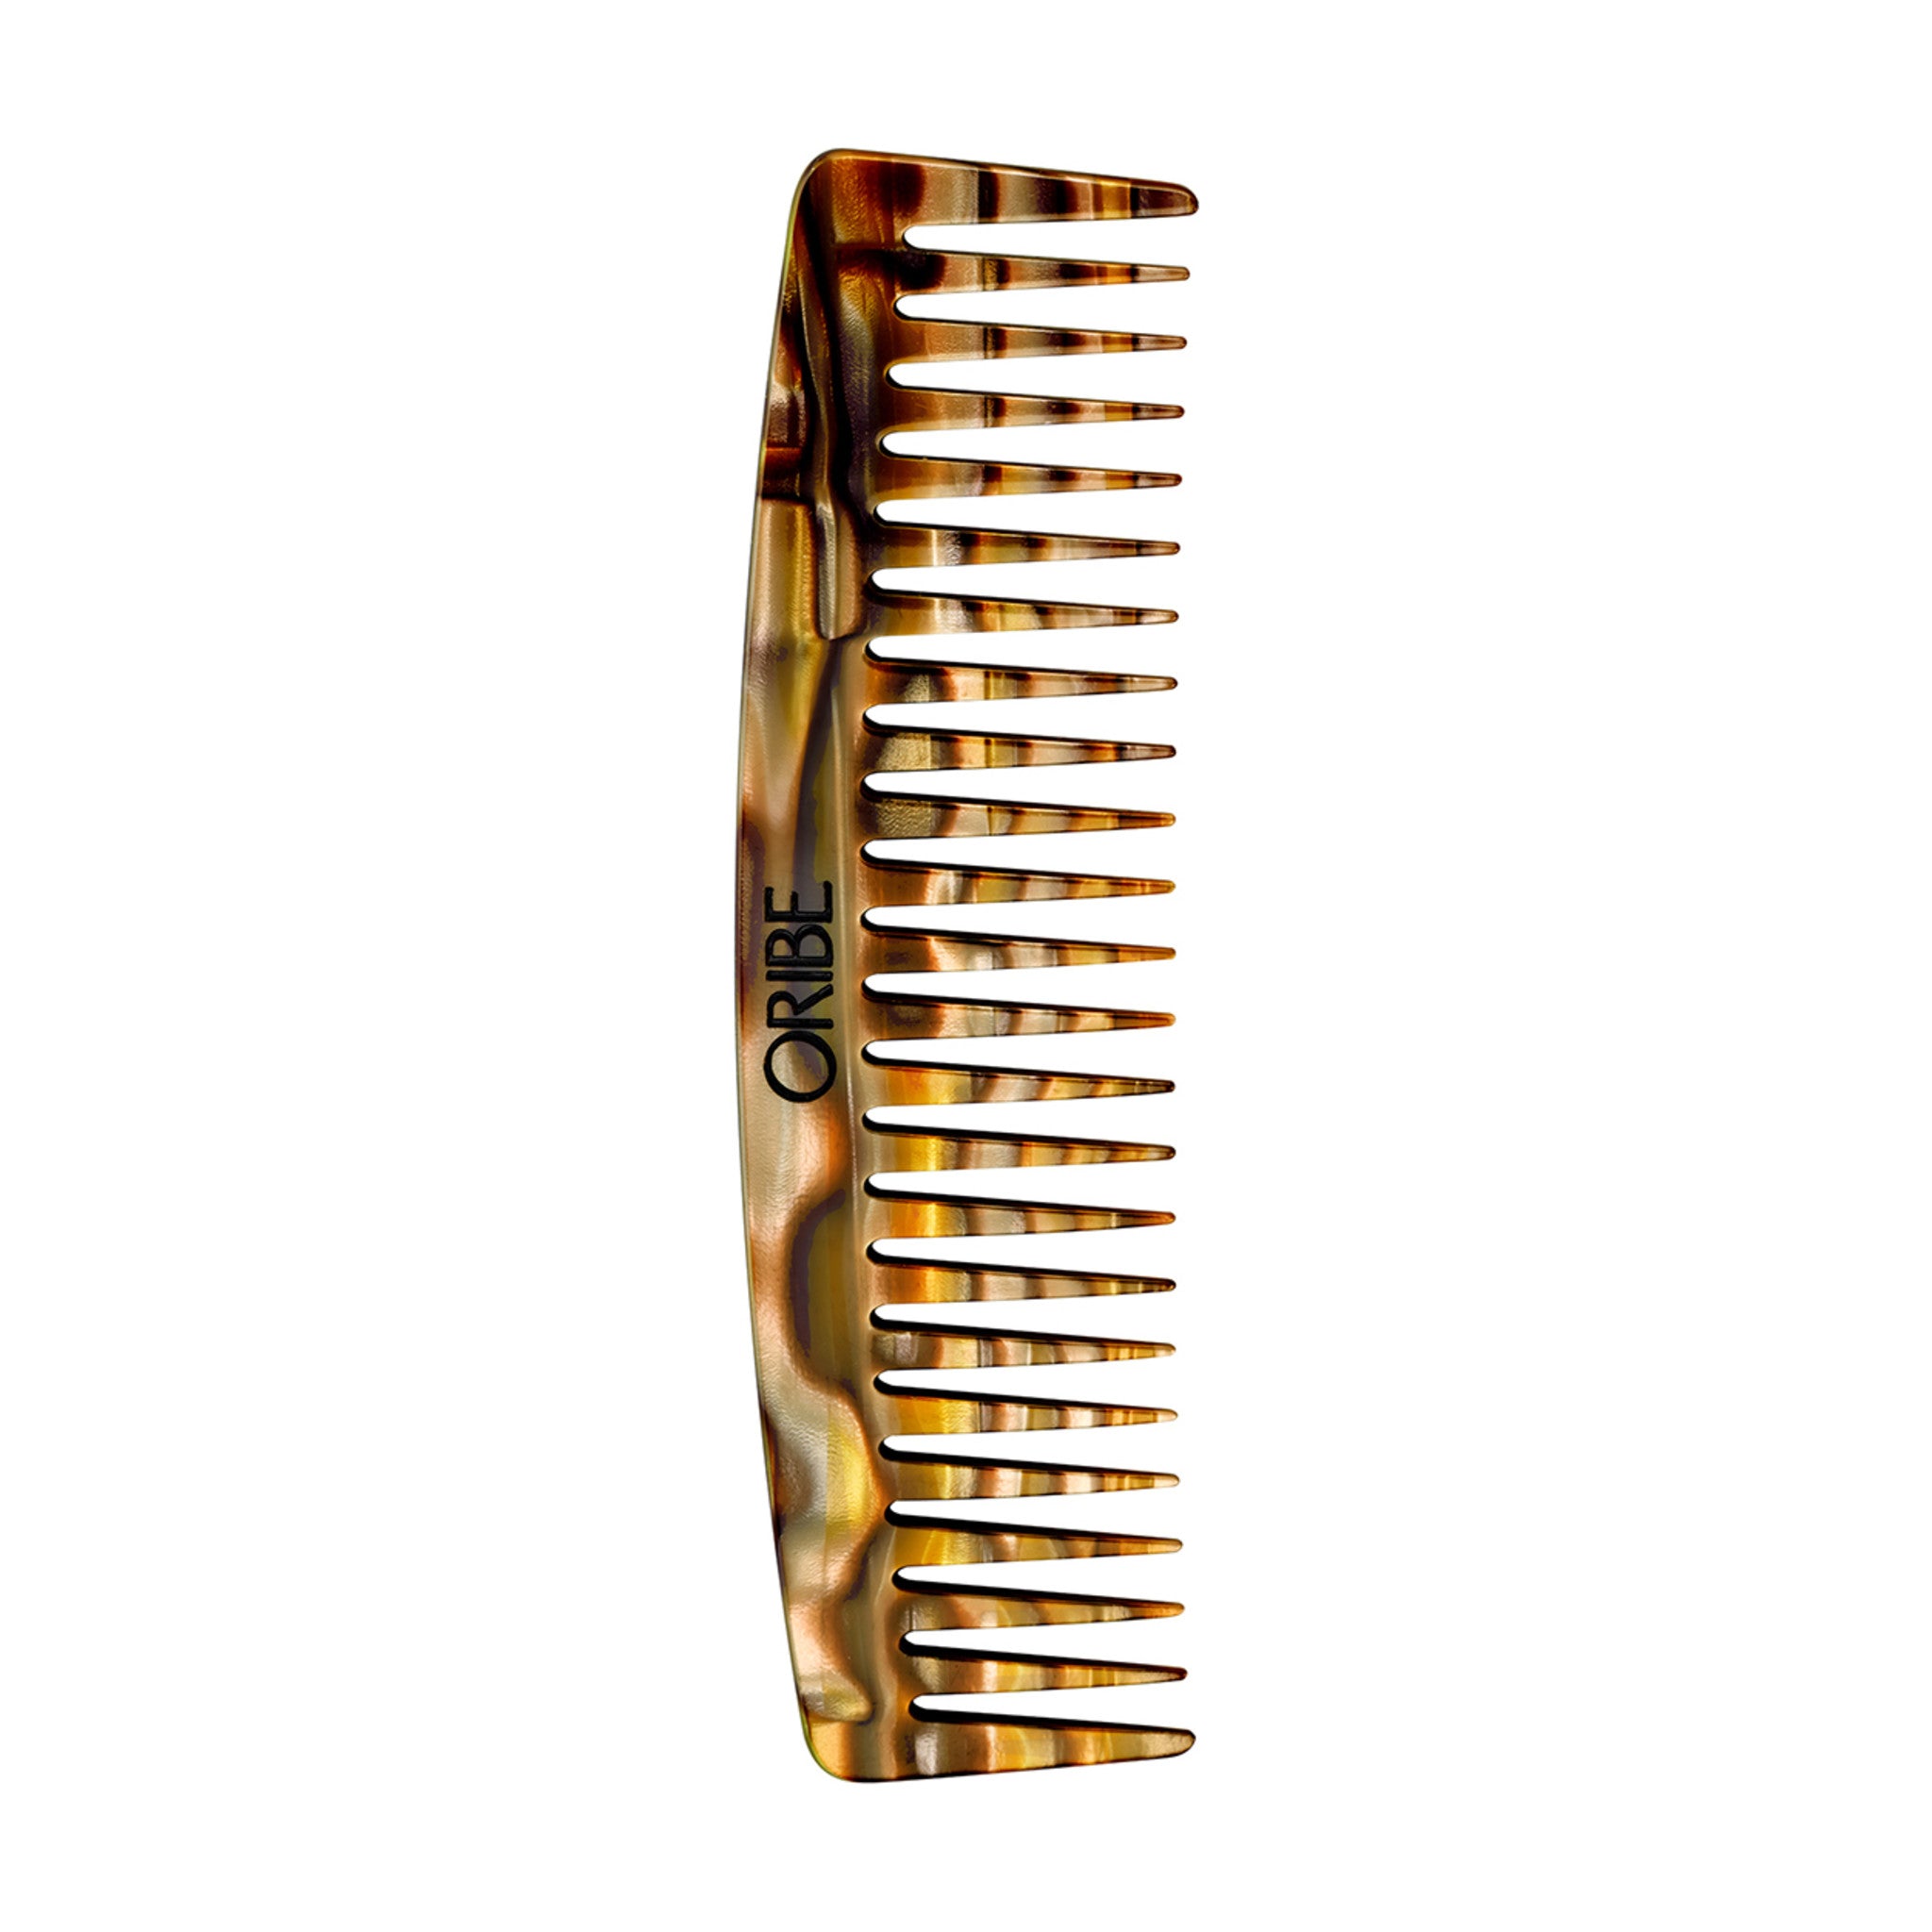 Oribe Wide Tooth Comb main image.